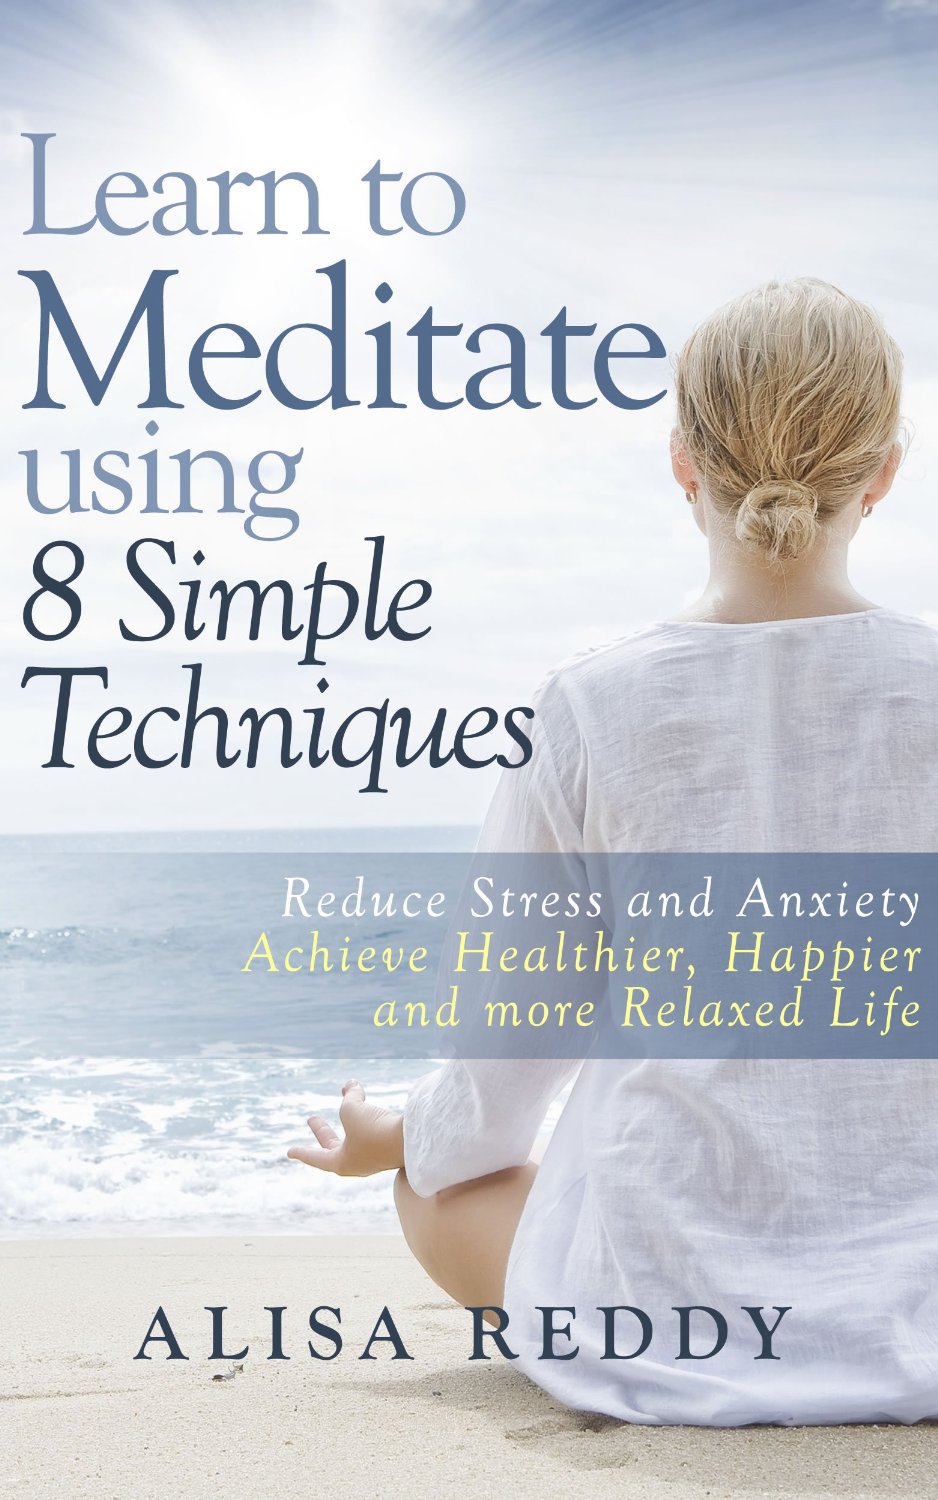 Learn to Meditate using 8 Simple Techniques by Alisa Reddy